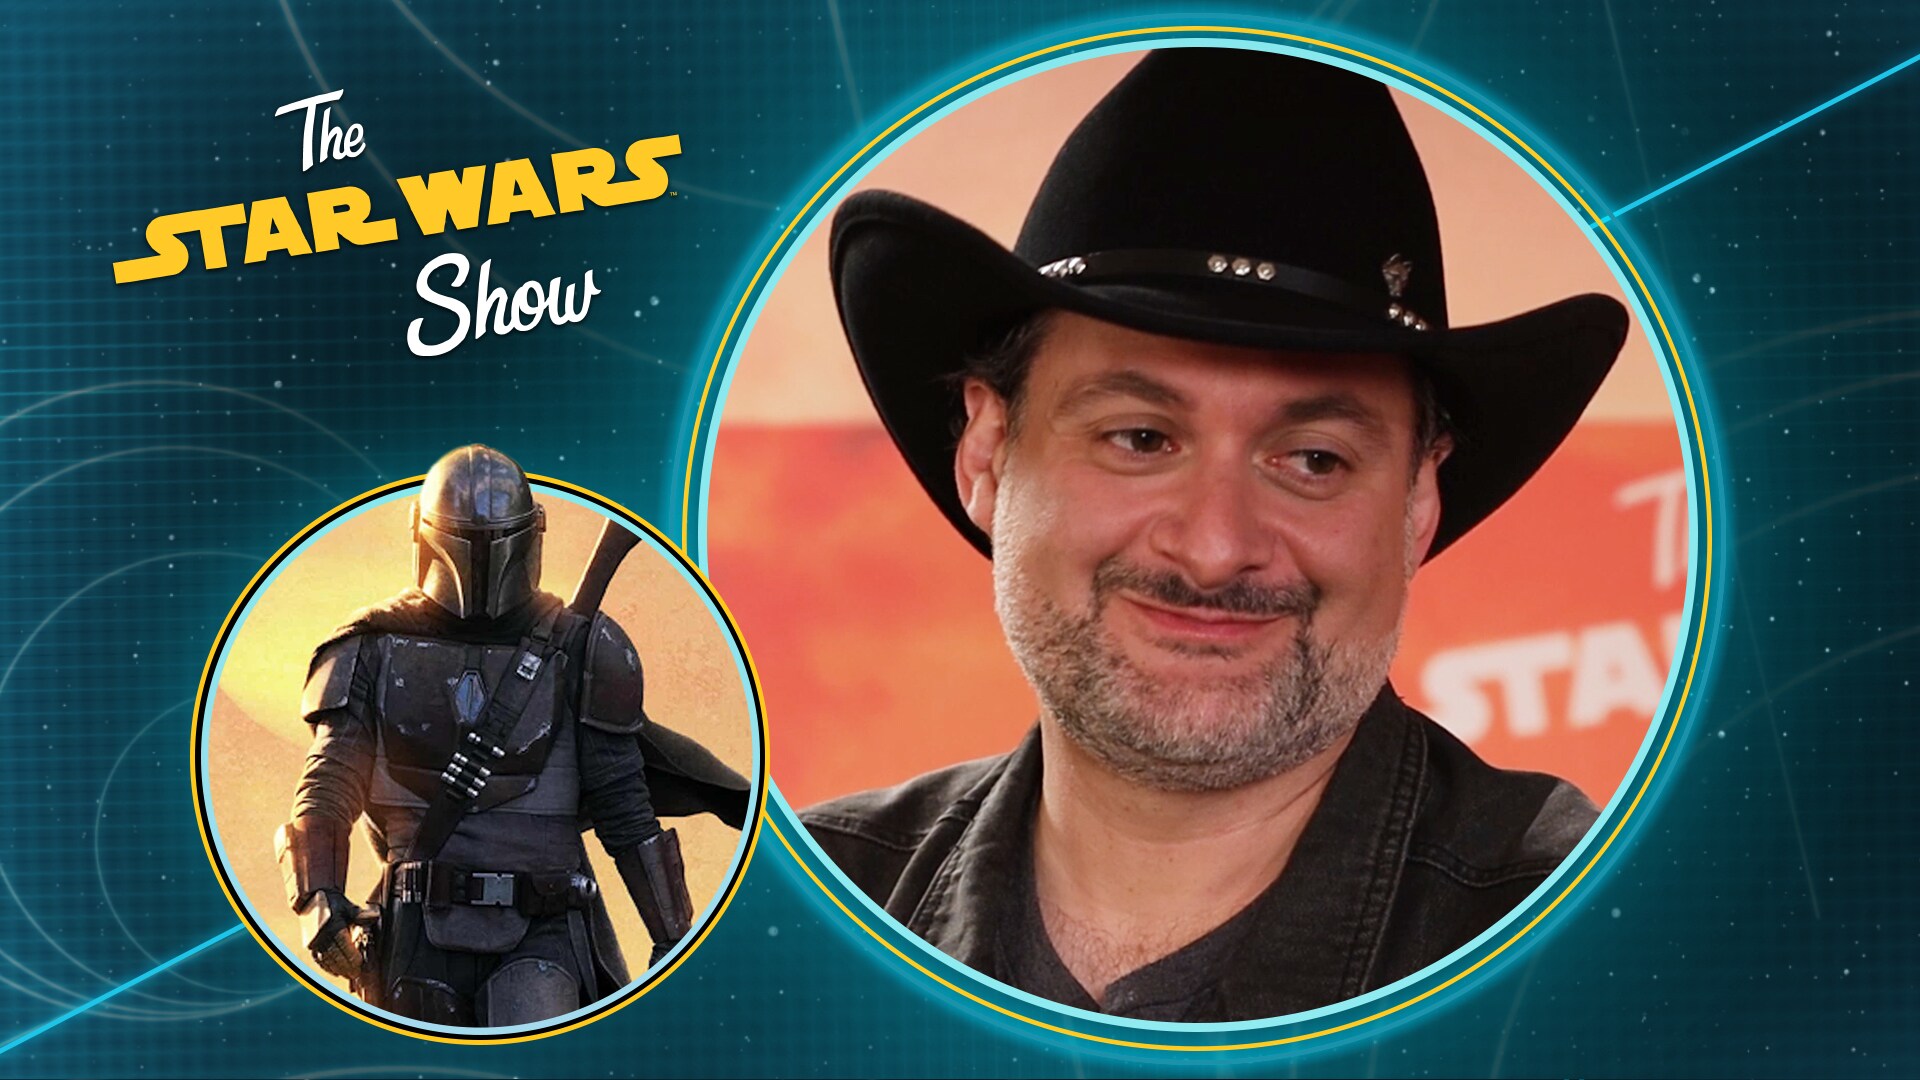 Dave Filoni Talks The Mandalorian, and Disney+ Is Now Live!